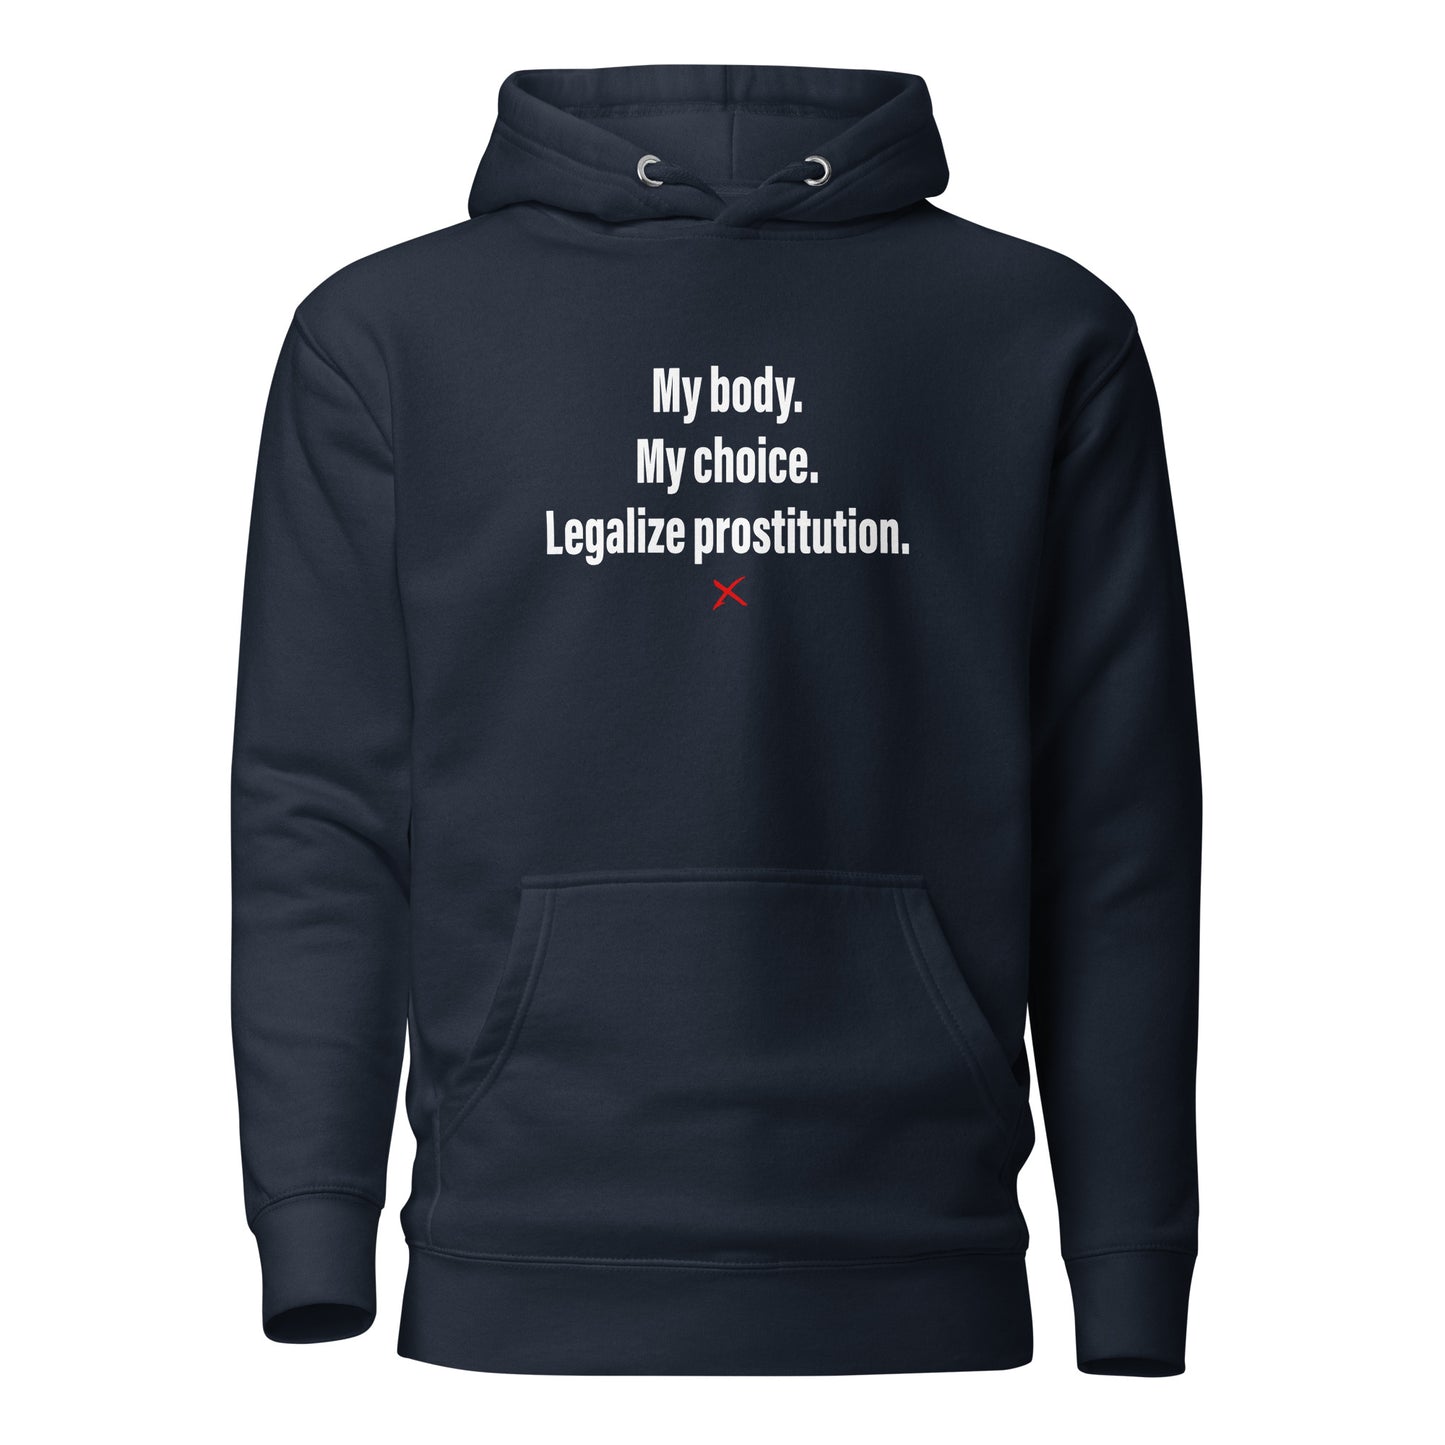 My body. My choice. Legalize prostitution. - Hoodie